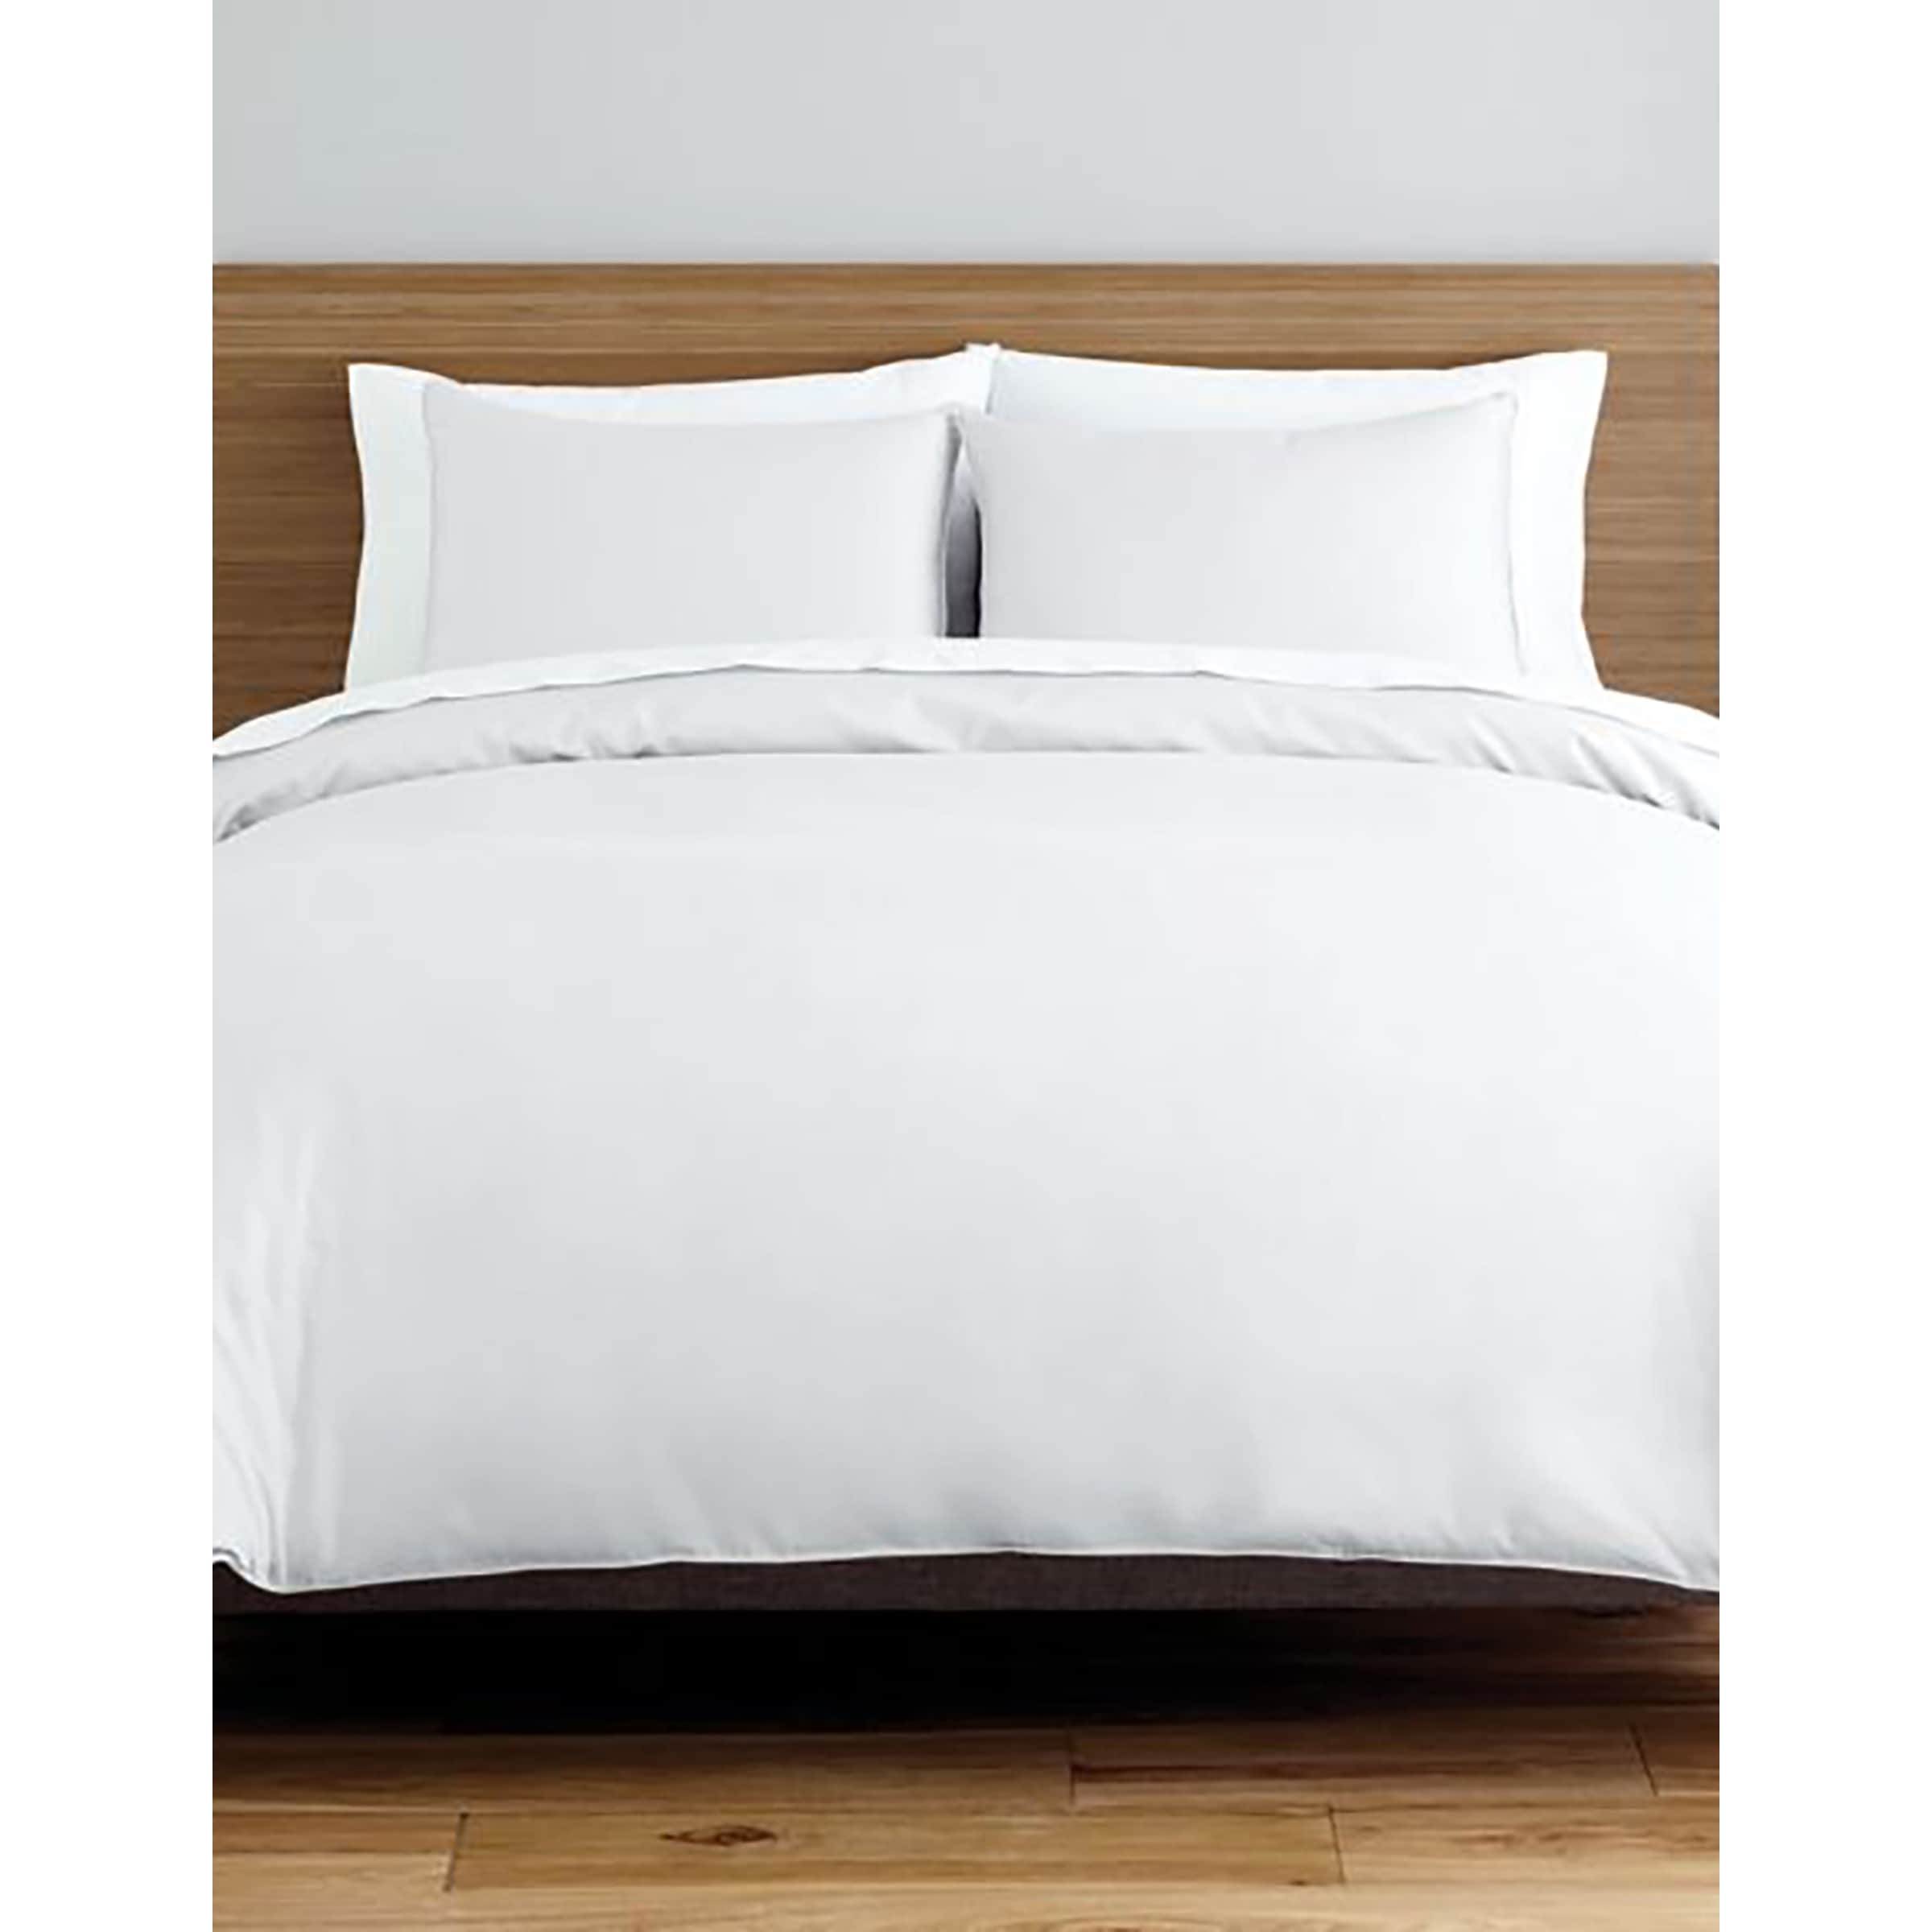 https://ak1.ostkcdn.com/images/products/is/images/direct/dc9c76997d7c6f2f6a281467797820df1ee8a687/Nestwell-450TC-Duvet-Set.jpg